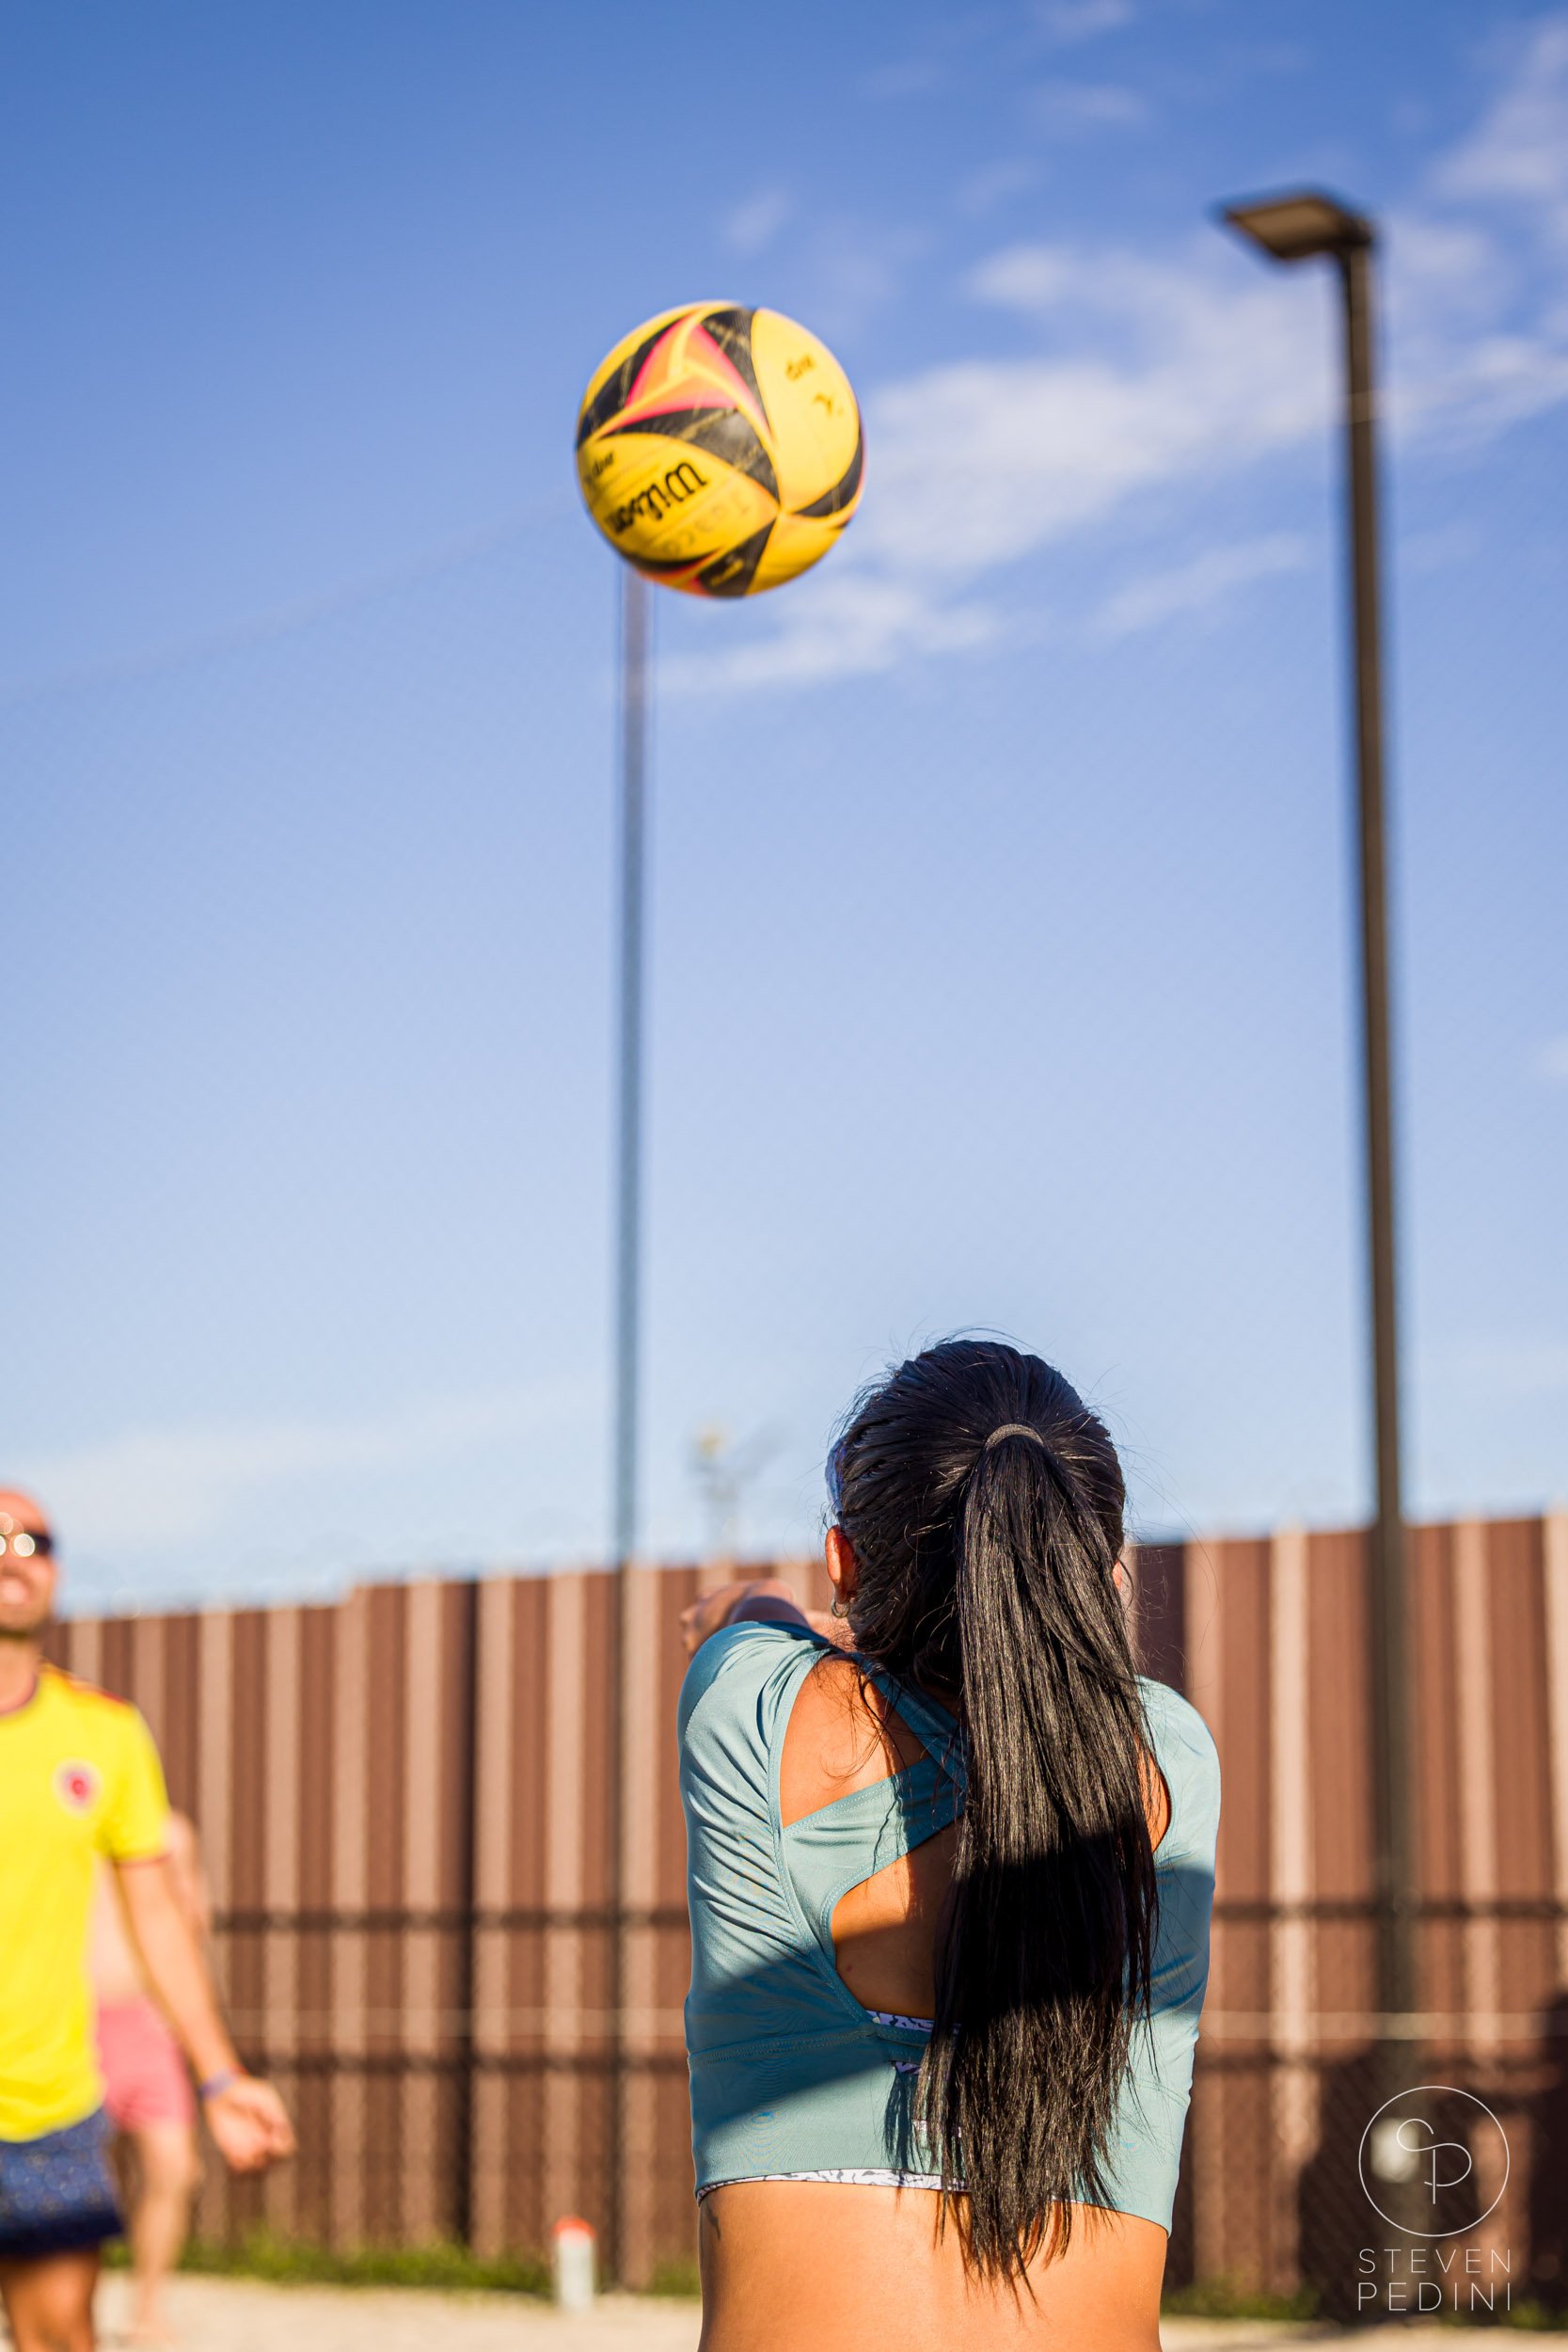 Steven Pedini Photography - Bumpy Pickle - Sand Volleyball - Houston TX - World Cup of Volleyball - 00094.jpg